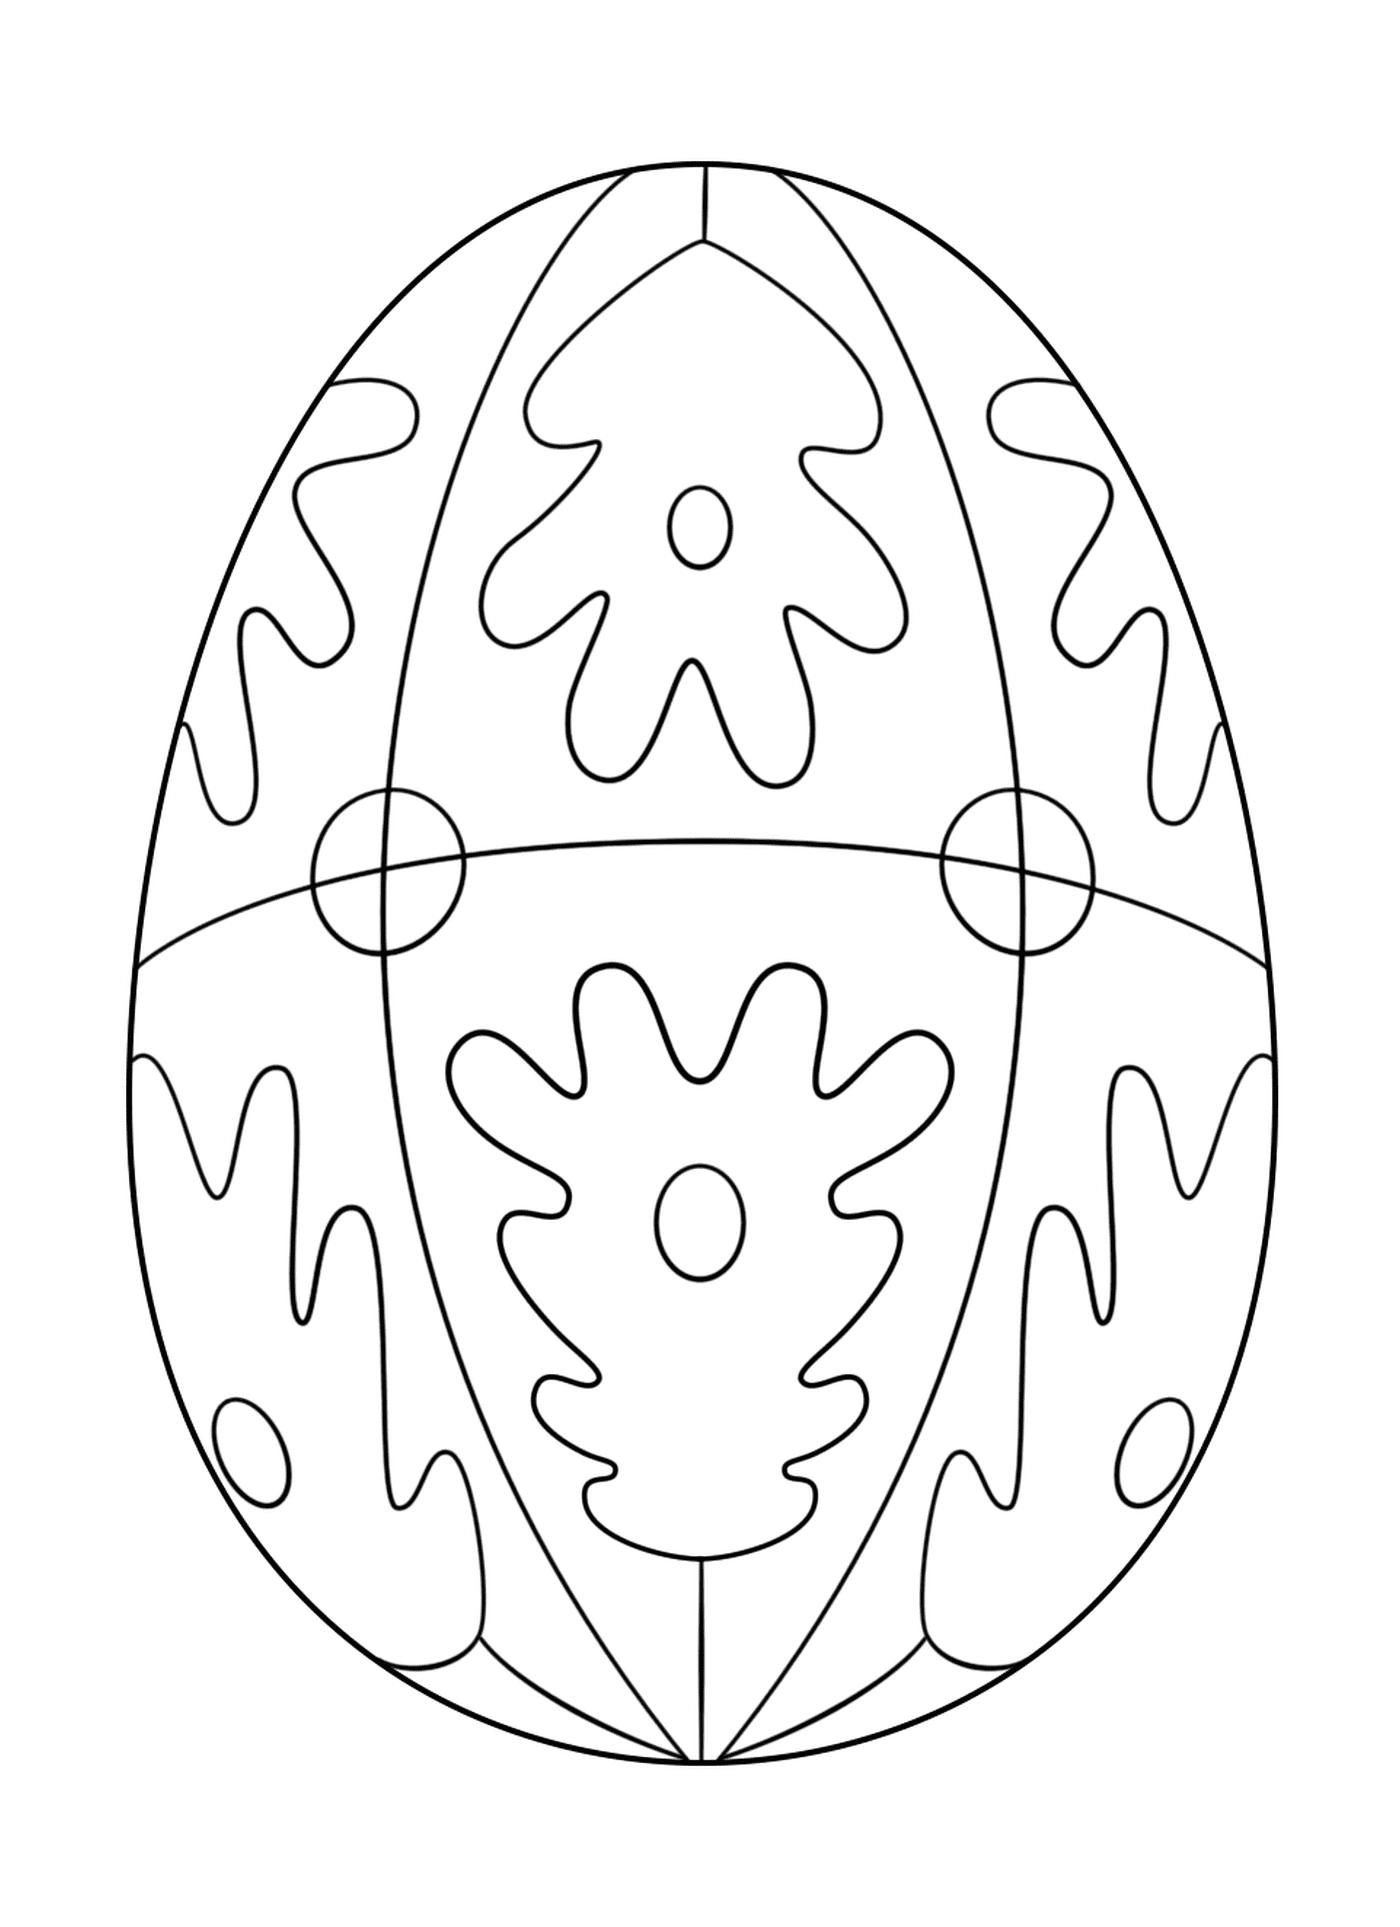  Easter egg with geometric pattern 